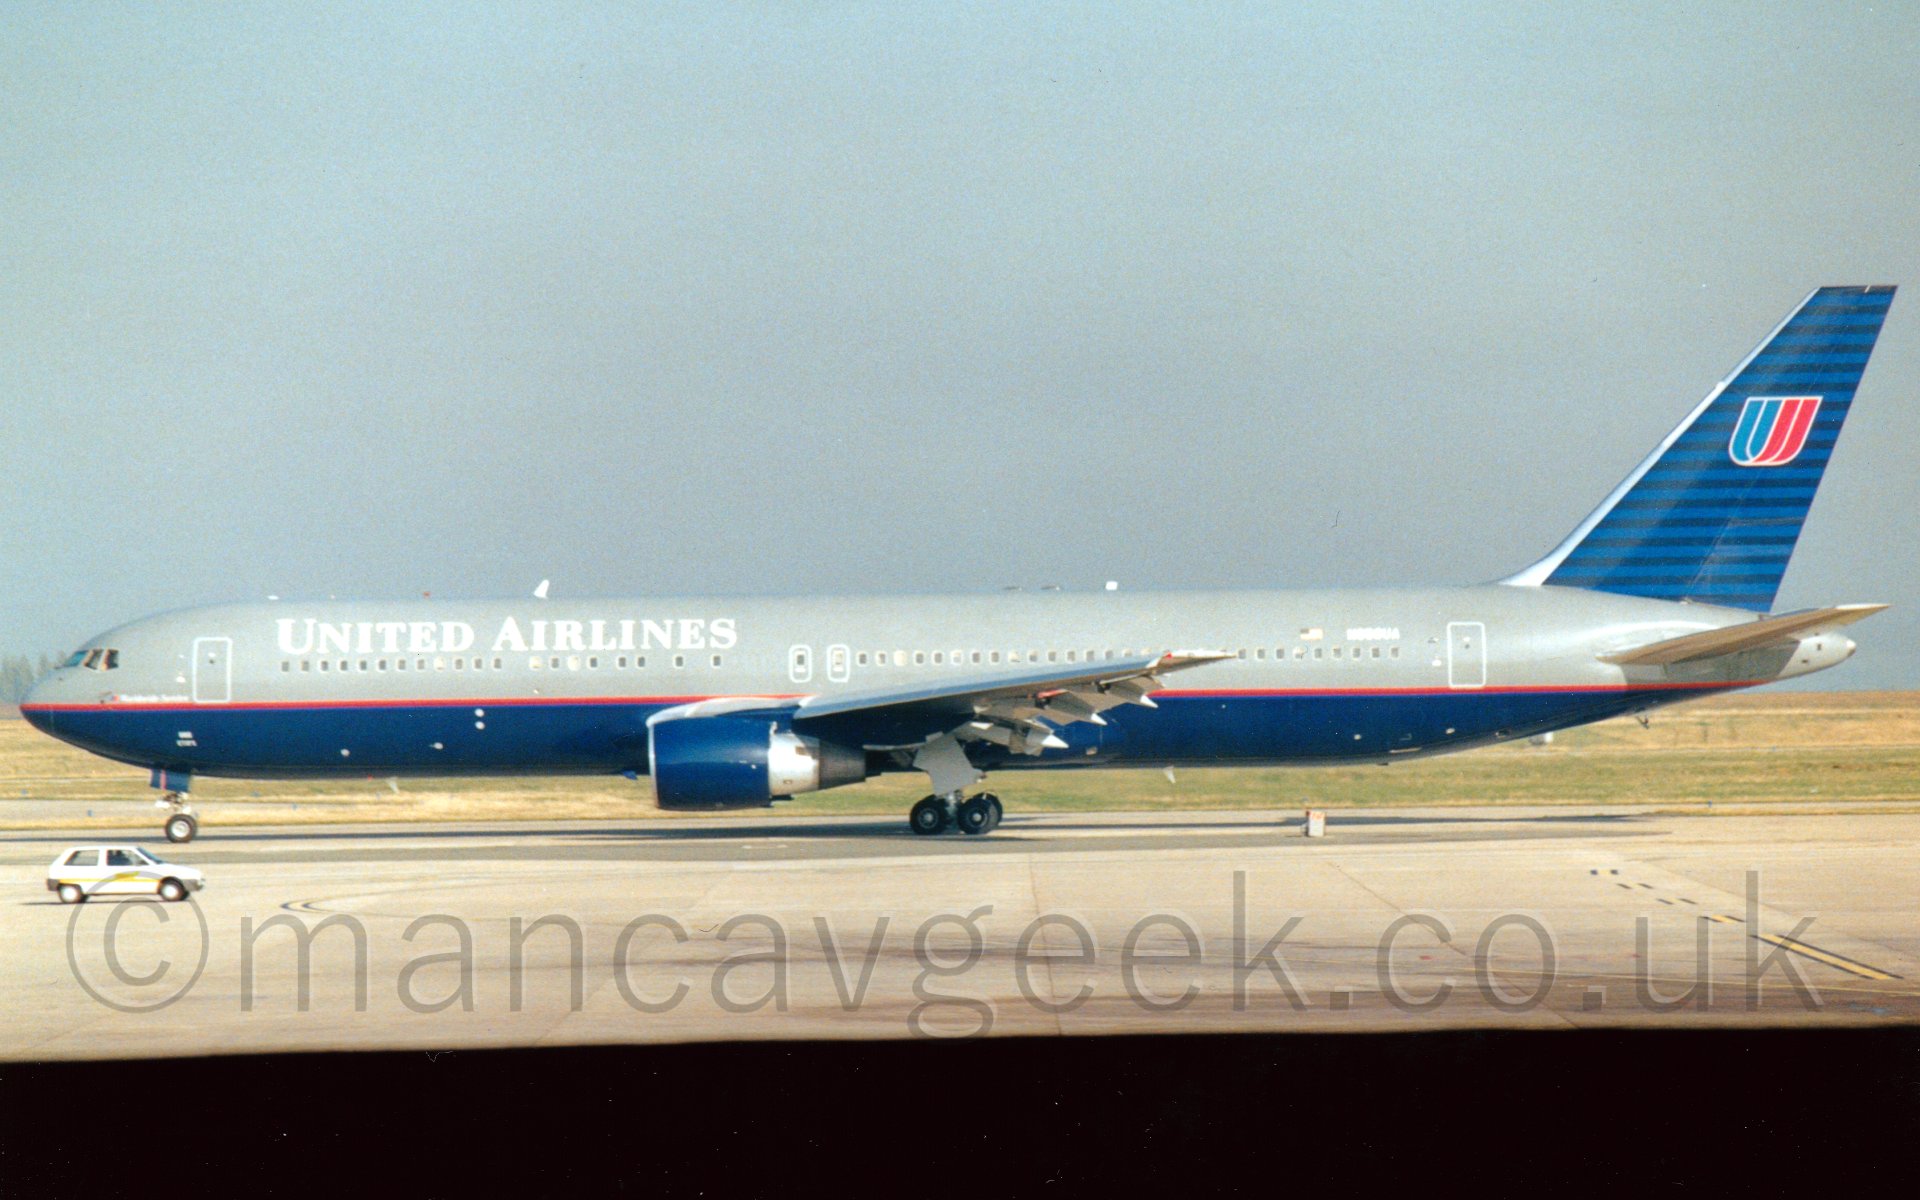 Side view of a twin engined jet airliner taxiing from right to left. The plane is mostly grey, with a dark blue belly, and a thin red stripe running along the body, seperating the 2 colours. There are white "United Airlines" t4itles on the upper forward fuselage, and the registration "N656UA" on the upper rear fuselage, also in white. The engine pods are the same dark blue, while the tail has a series of thin horizontal stripes in dark and mid-blue, with a lette "U", seemingly formed from a twisted ribbon, one side red, the other light blue. In the foreground, a small white car is on the lower left of the frame, driving to the right past the plane's nosewheel. In the background, grass runs off to the horizon, under a flat grey sky.